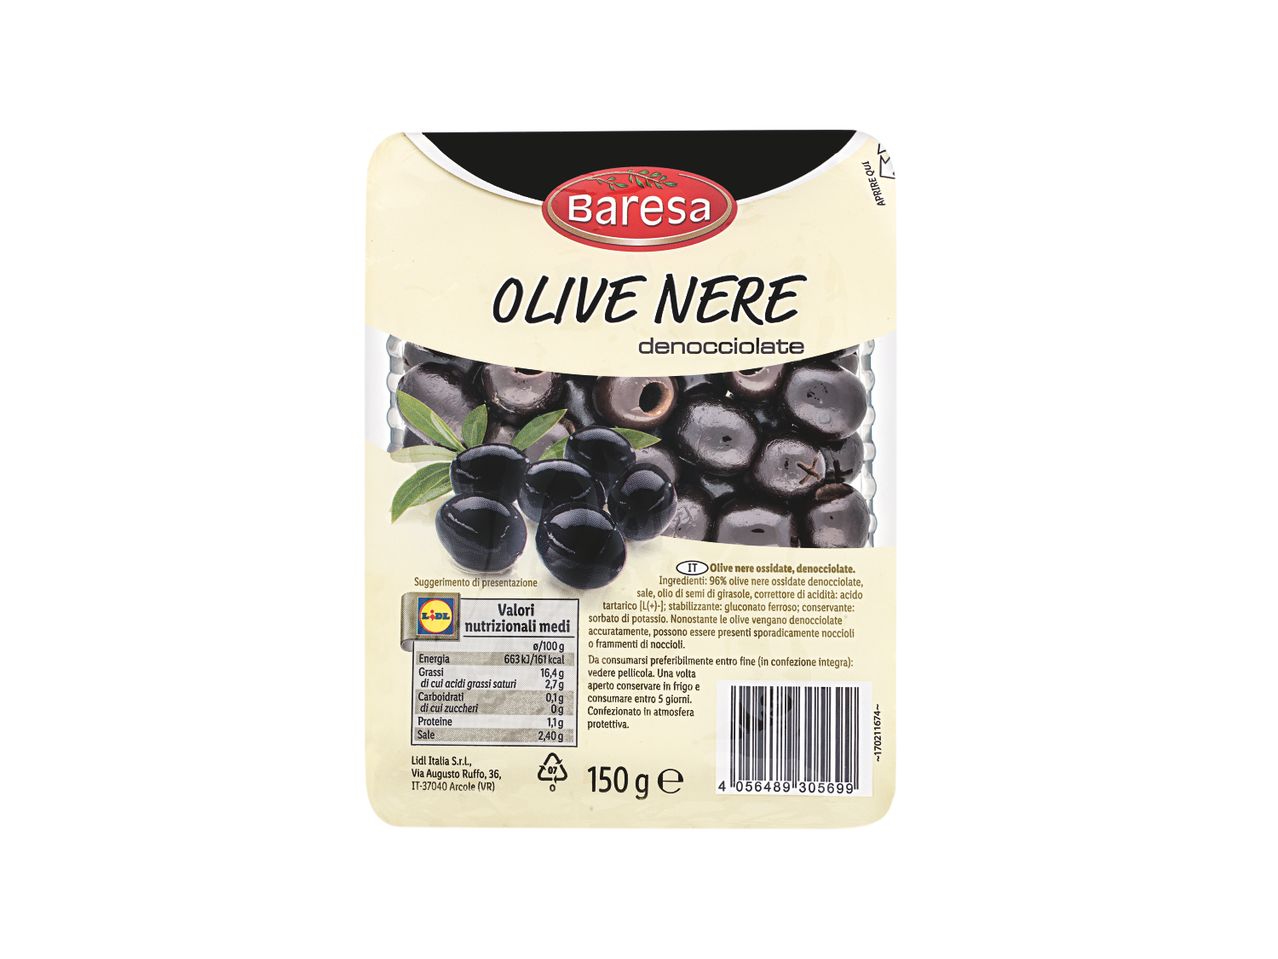 Go to full screen view: Black Pitted Olives - Image 1